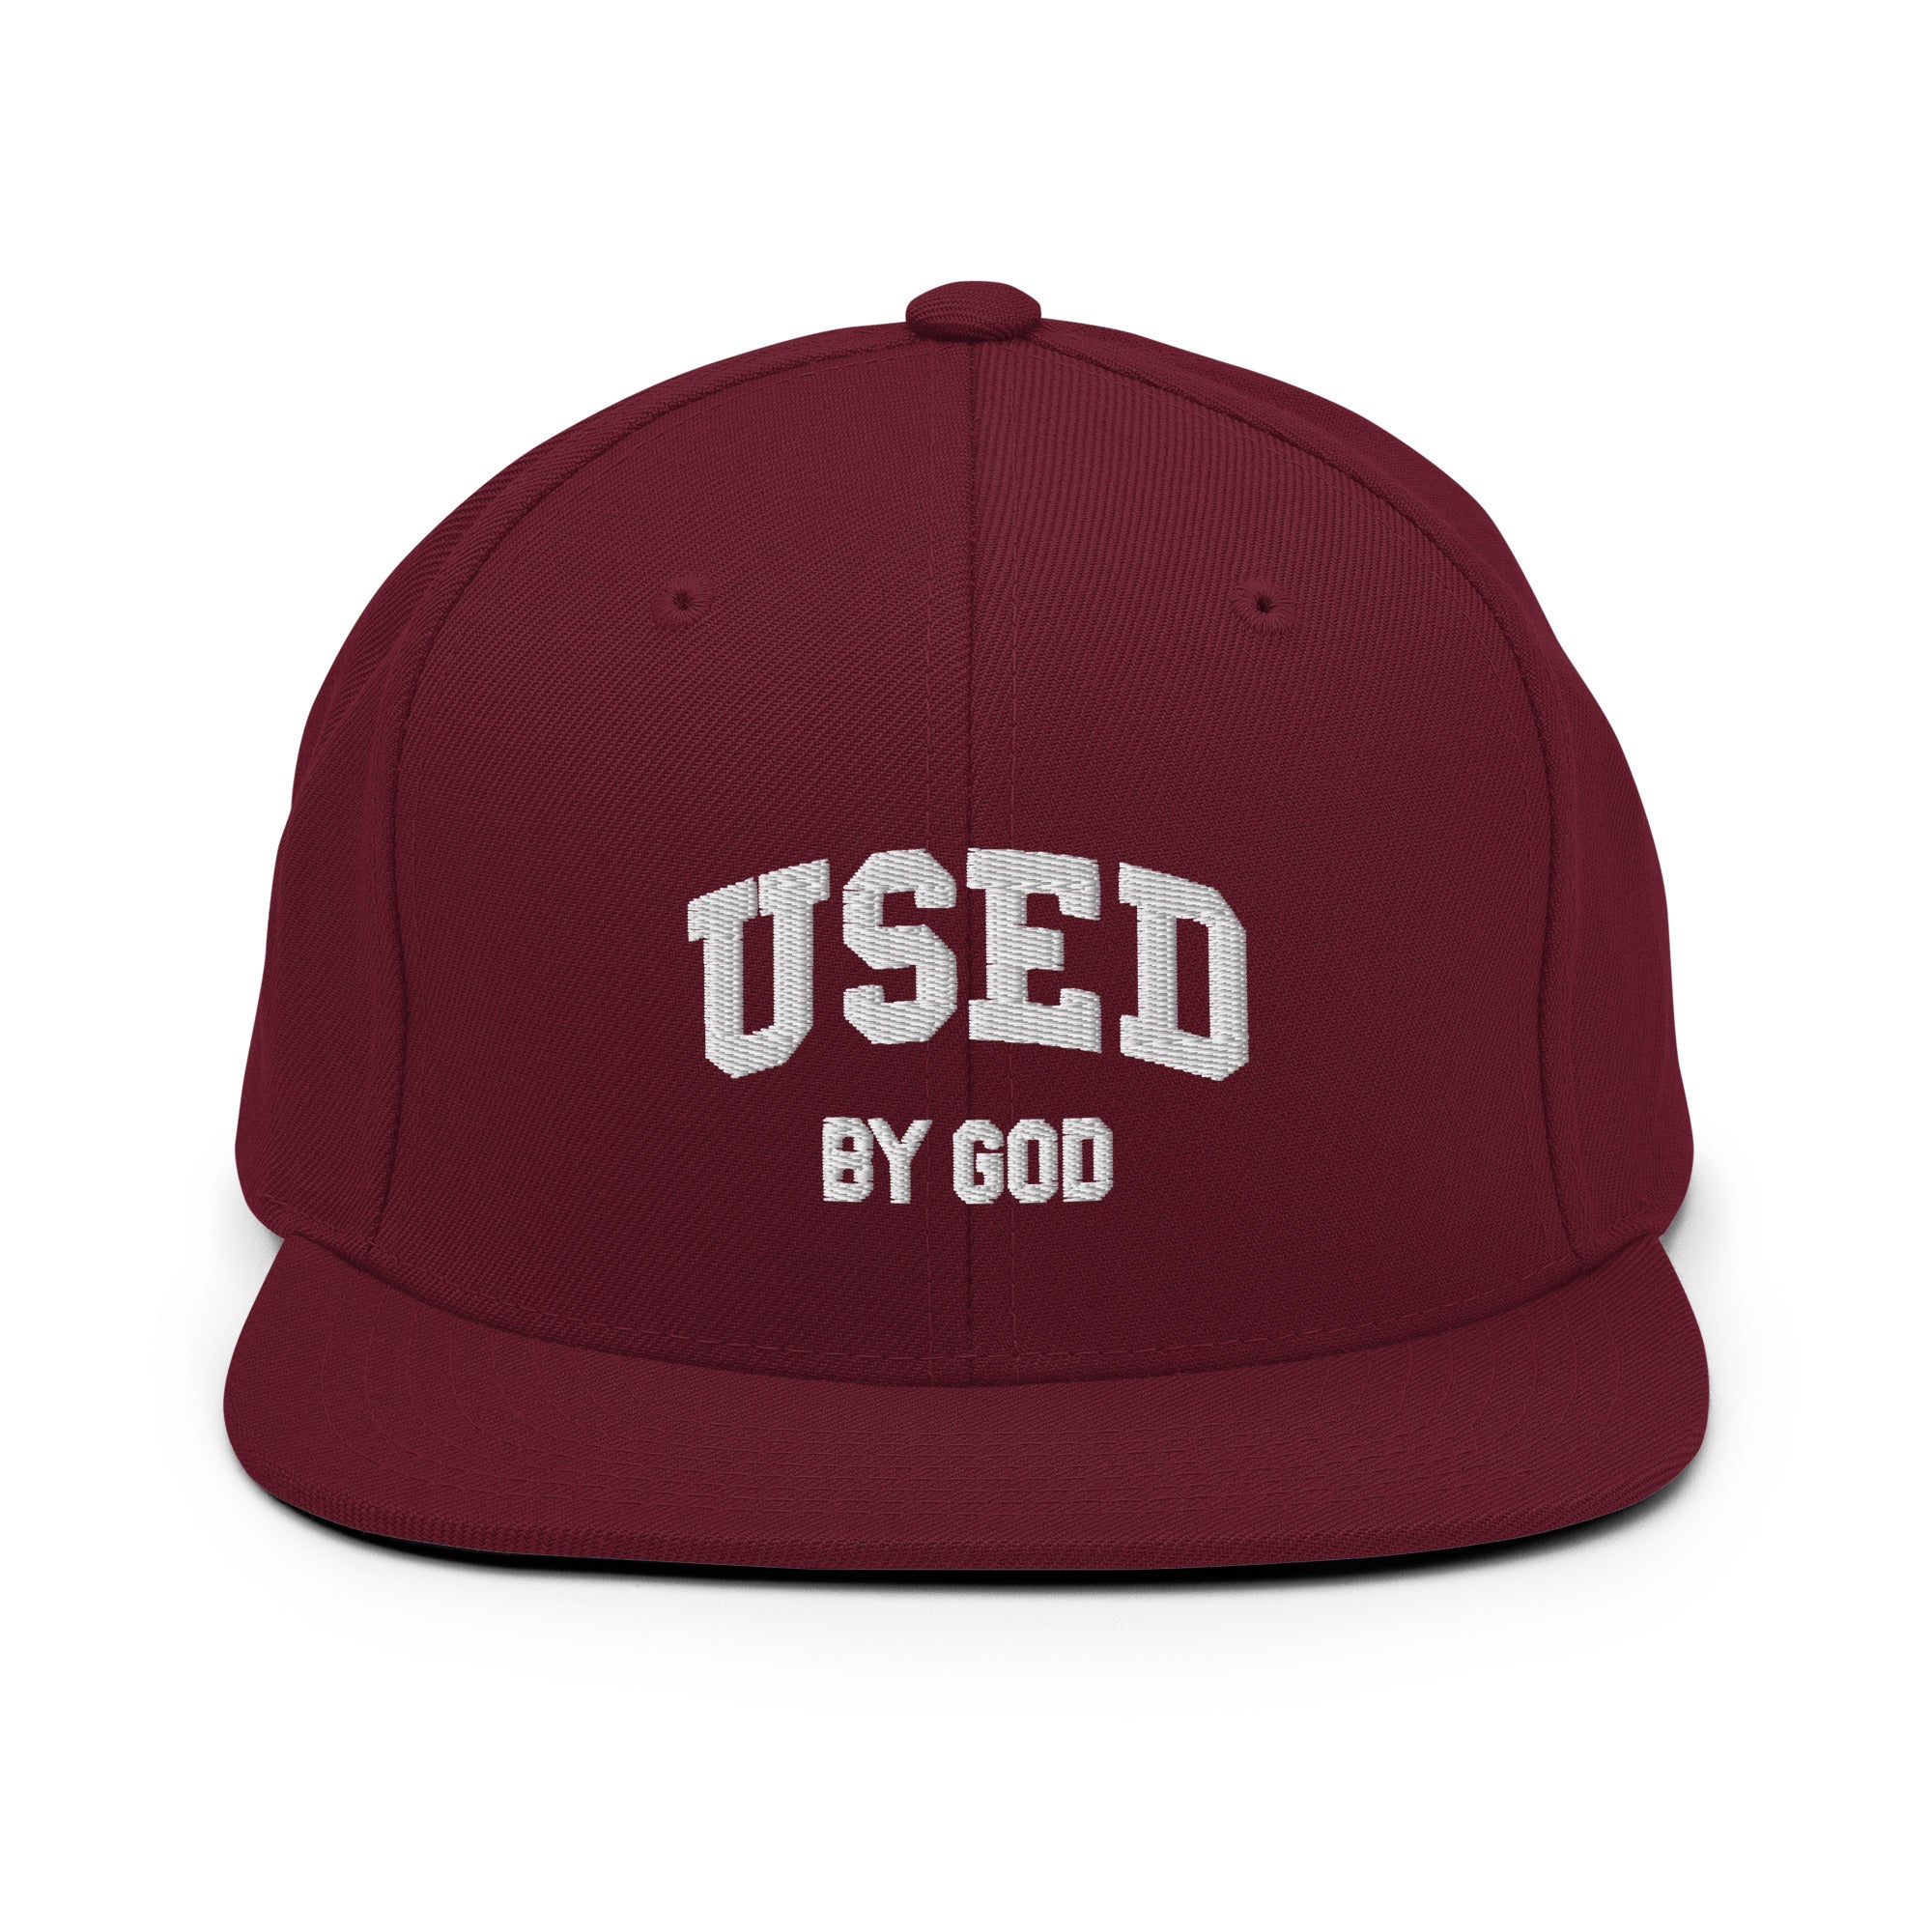 UBG Collegiate Snapback Hat, Used By God, Used By God Clothing, Christian Apparel, Christian Hats, Christian T-Shirts, Christian Clothing, God Shirts, Christian Sweatshirts, God Clothing, Jesus Hoodie, Jesus Clothes, God Is Dope, Art Of Homage, Red Letter Clothing, Elevated Faith, Active Faith Sports, Beacon Threads, God The Father Apparel